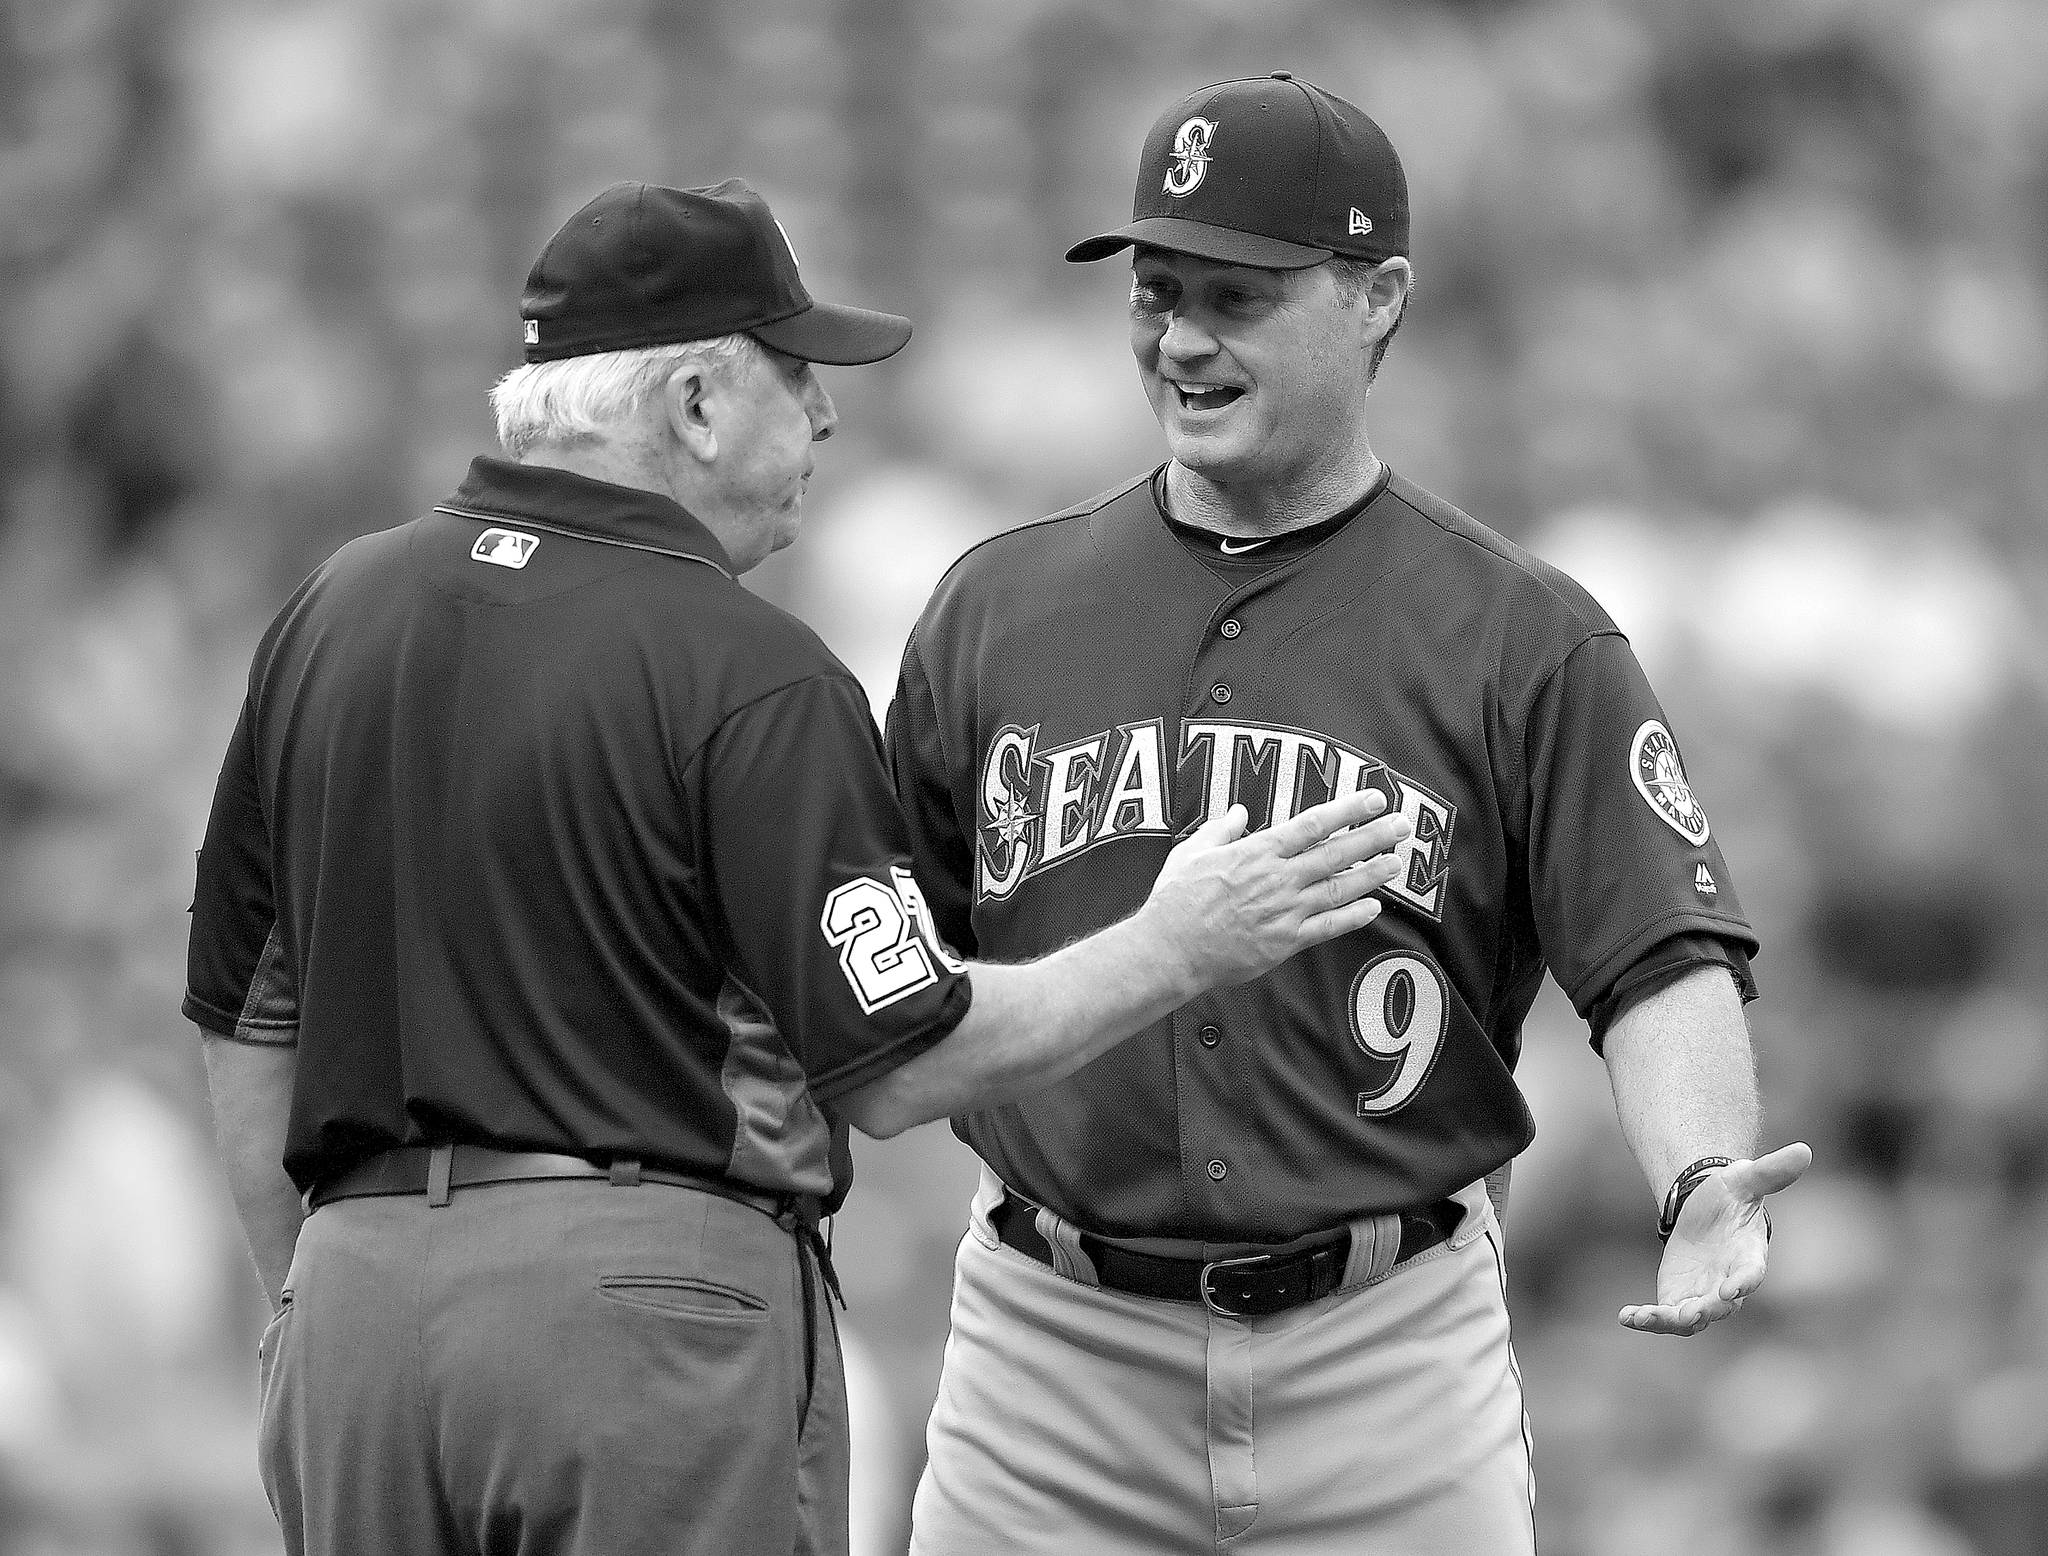 Going the Rounds: As far as Mariners managers are concerned, Servais second only to Pinella